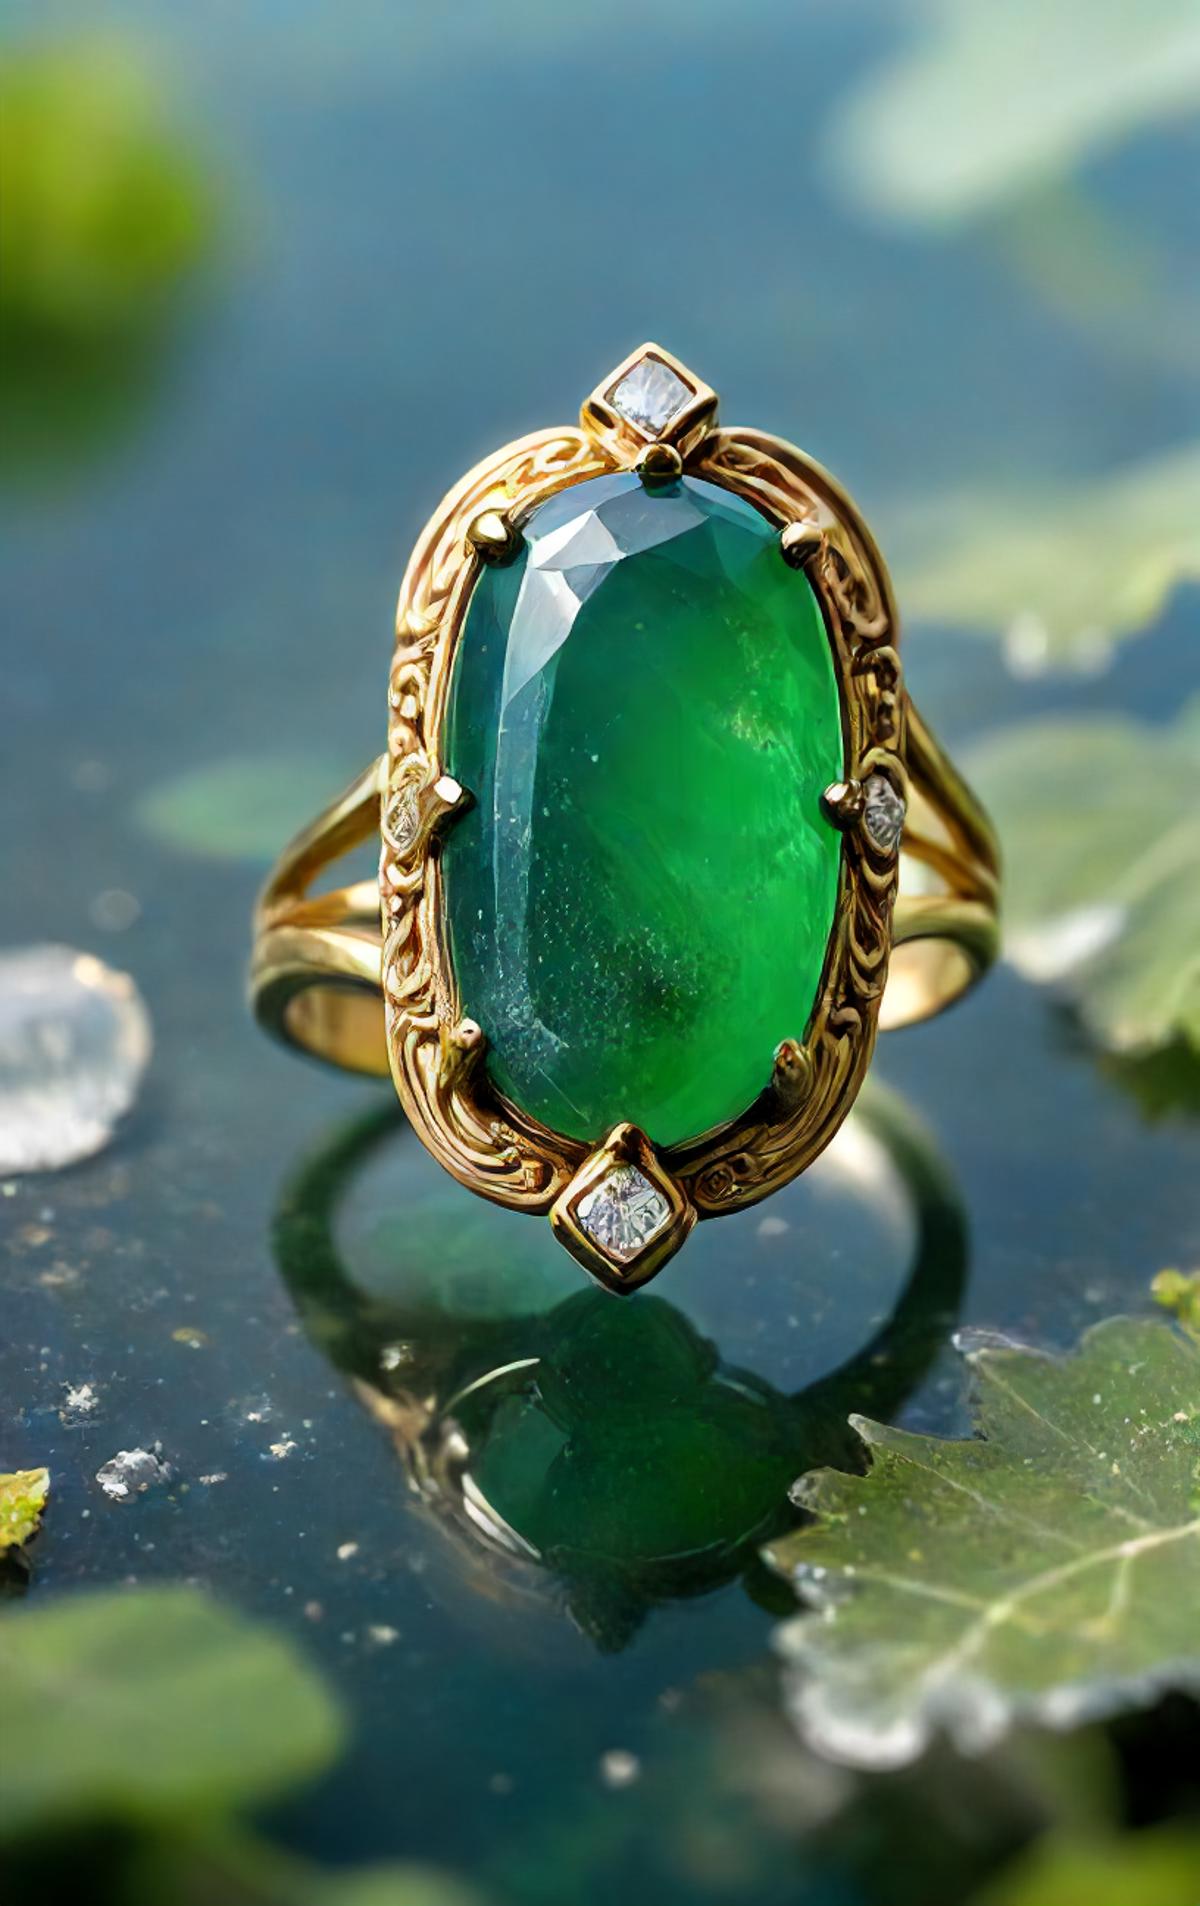 A ring with a green gemstone, possibly a jade, set in gold with diamonds around it.